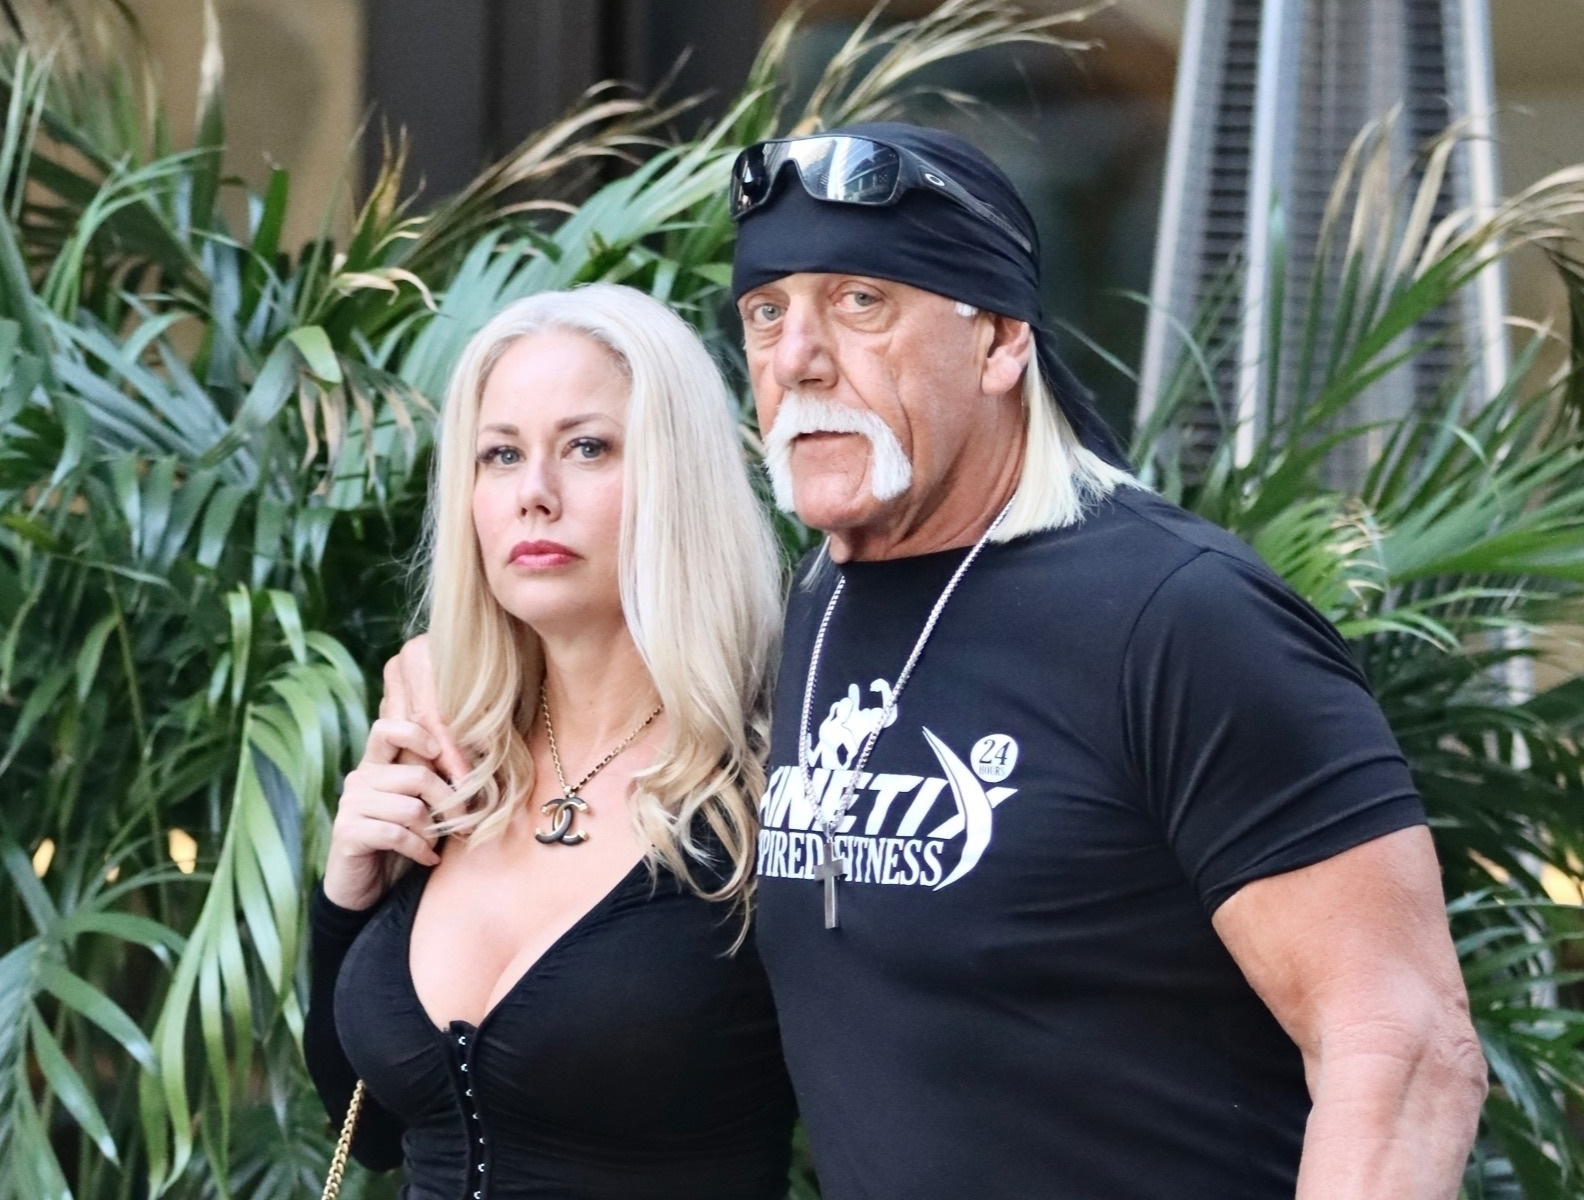 <p><span>Hulk Hogan met yoga instructor Sky Daily in early 2022. While out on the town, he sent a drink over to a group of women Sky was with, he revealed while recounting their meet-cute during a speech he made at a friend's wedding, The Los Angeles Times reported. When one of the ladies came over to the wrestling icon to say thank you, he quipped, "Who's the blonde?" Hulk and Sky sat down and talked for a bit before he left, figuring he'd go home to do laundry or something mundane. "And then when I got in my car, there was just bang, bang, bang, bang on the window. It scared the hell out of me, so I put the window down," he continued. Sky's friend "stuck her head in my car," he said, and urged Hulk to call the yoga instructor, adding, "She's a nice girl!" According to Hulk, "It made me think twice about just ghosting and going home and never calling." They soon started dating and </span><a href="https://www.wonderwall.com/celebrity/couples/former-boy-meets-world-child-star-indicates-he-popped-the-question-following-years-of-low-key-coupledom-more-engagements-of-2023-691728.gallery?photoId=768361">got engaged</a><span> in July 2023.</span></p>